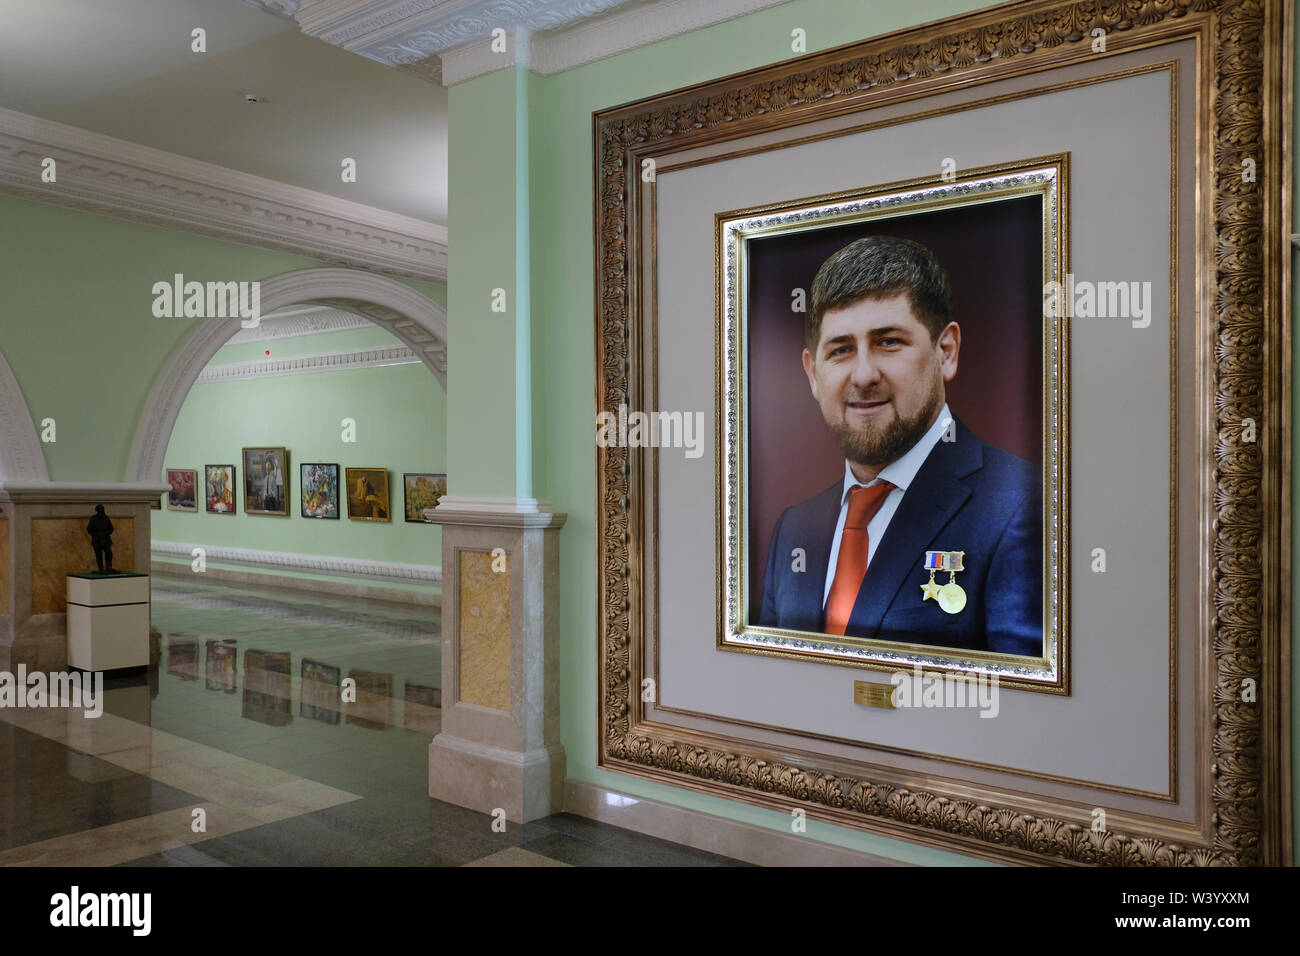 A framed image of Ramzan Kadyrov the Head of the Chechen Republic displayed at Akhmat Kadyrov museum overwhelmingly a shrine to Akhmat and Ramzan Kadyrov in Grozny the capital city of Chechnya in the North Caucasian Federal District of Russia. Stock Photo